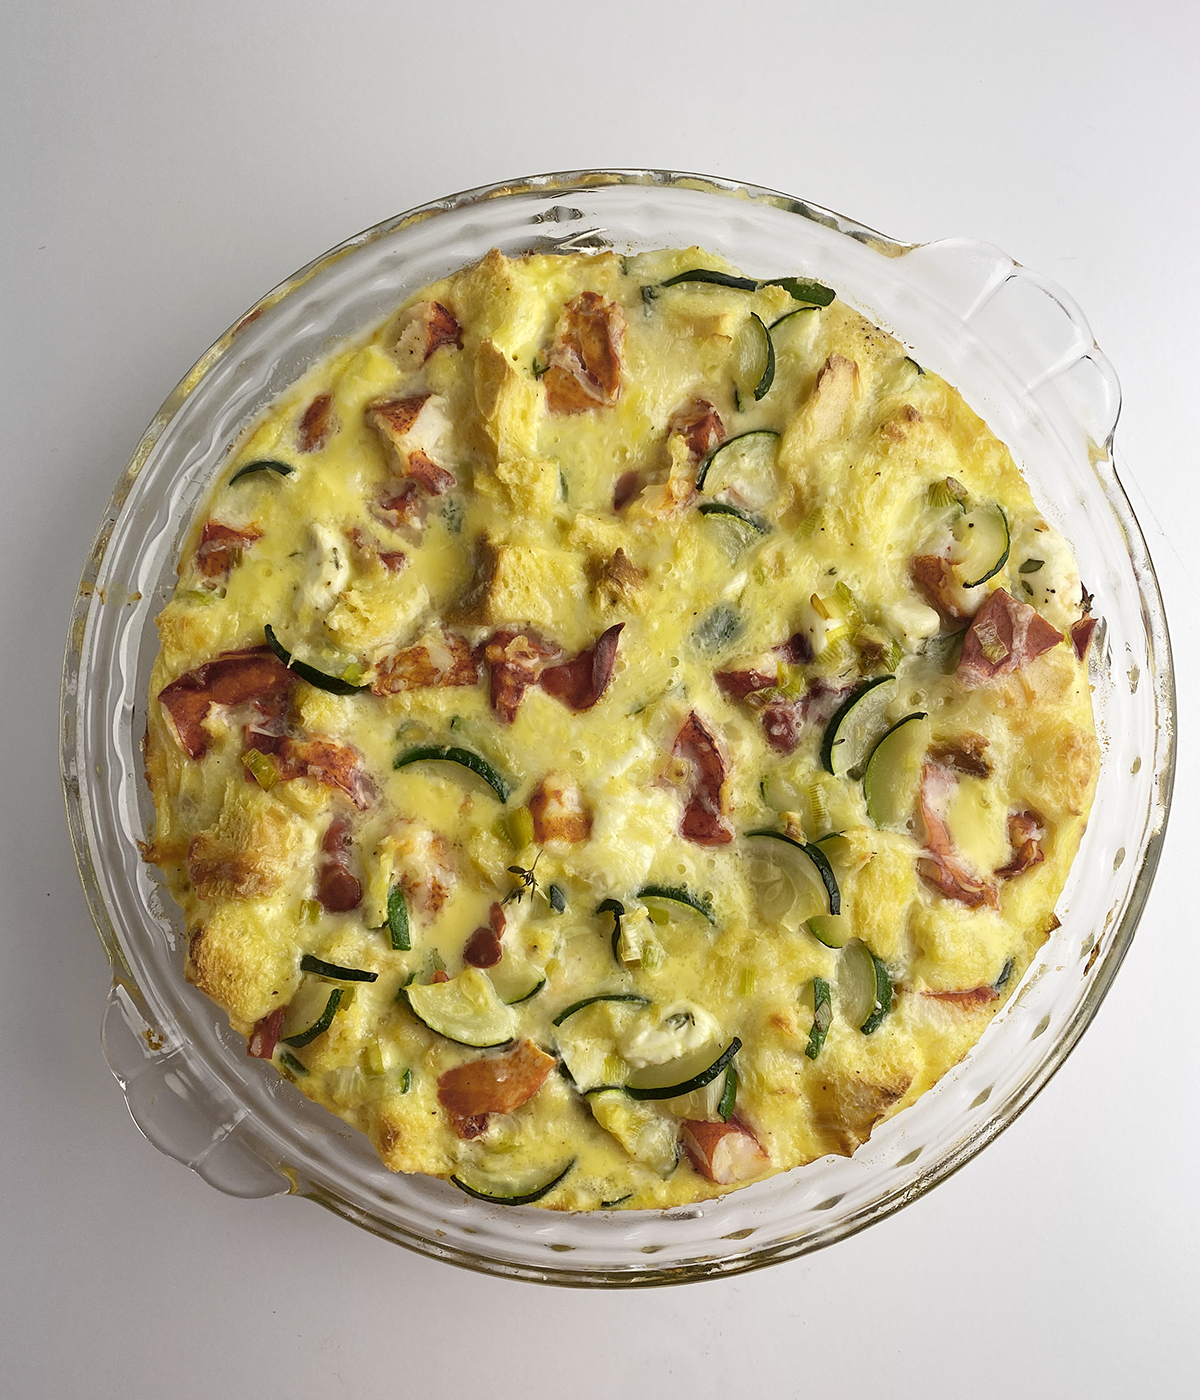 Fully baked lobster frittata in a pie plate.